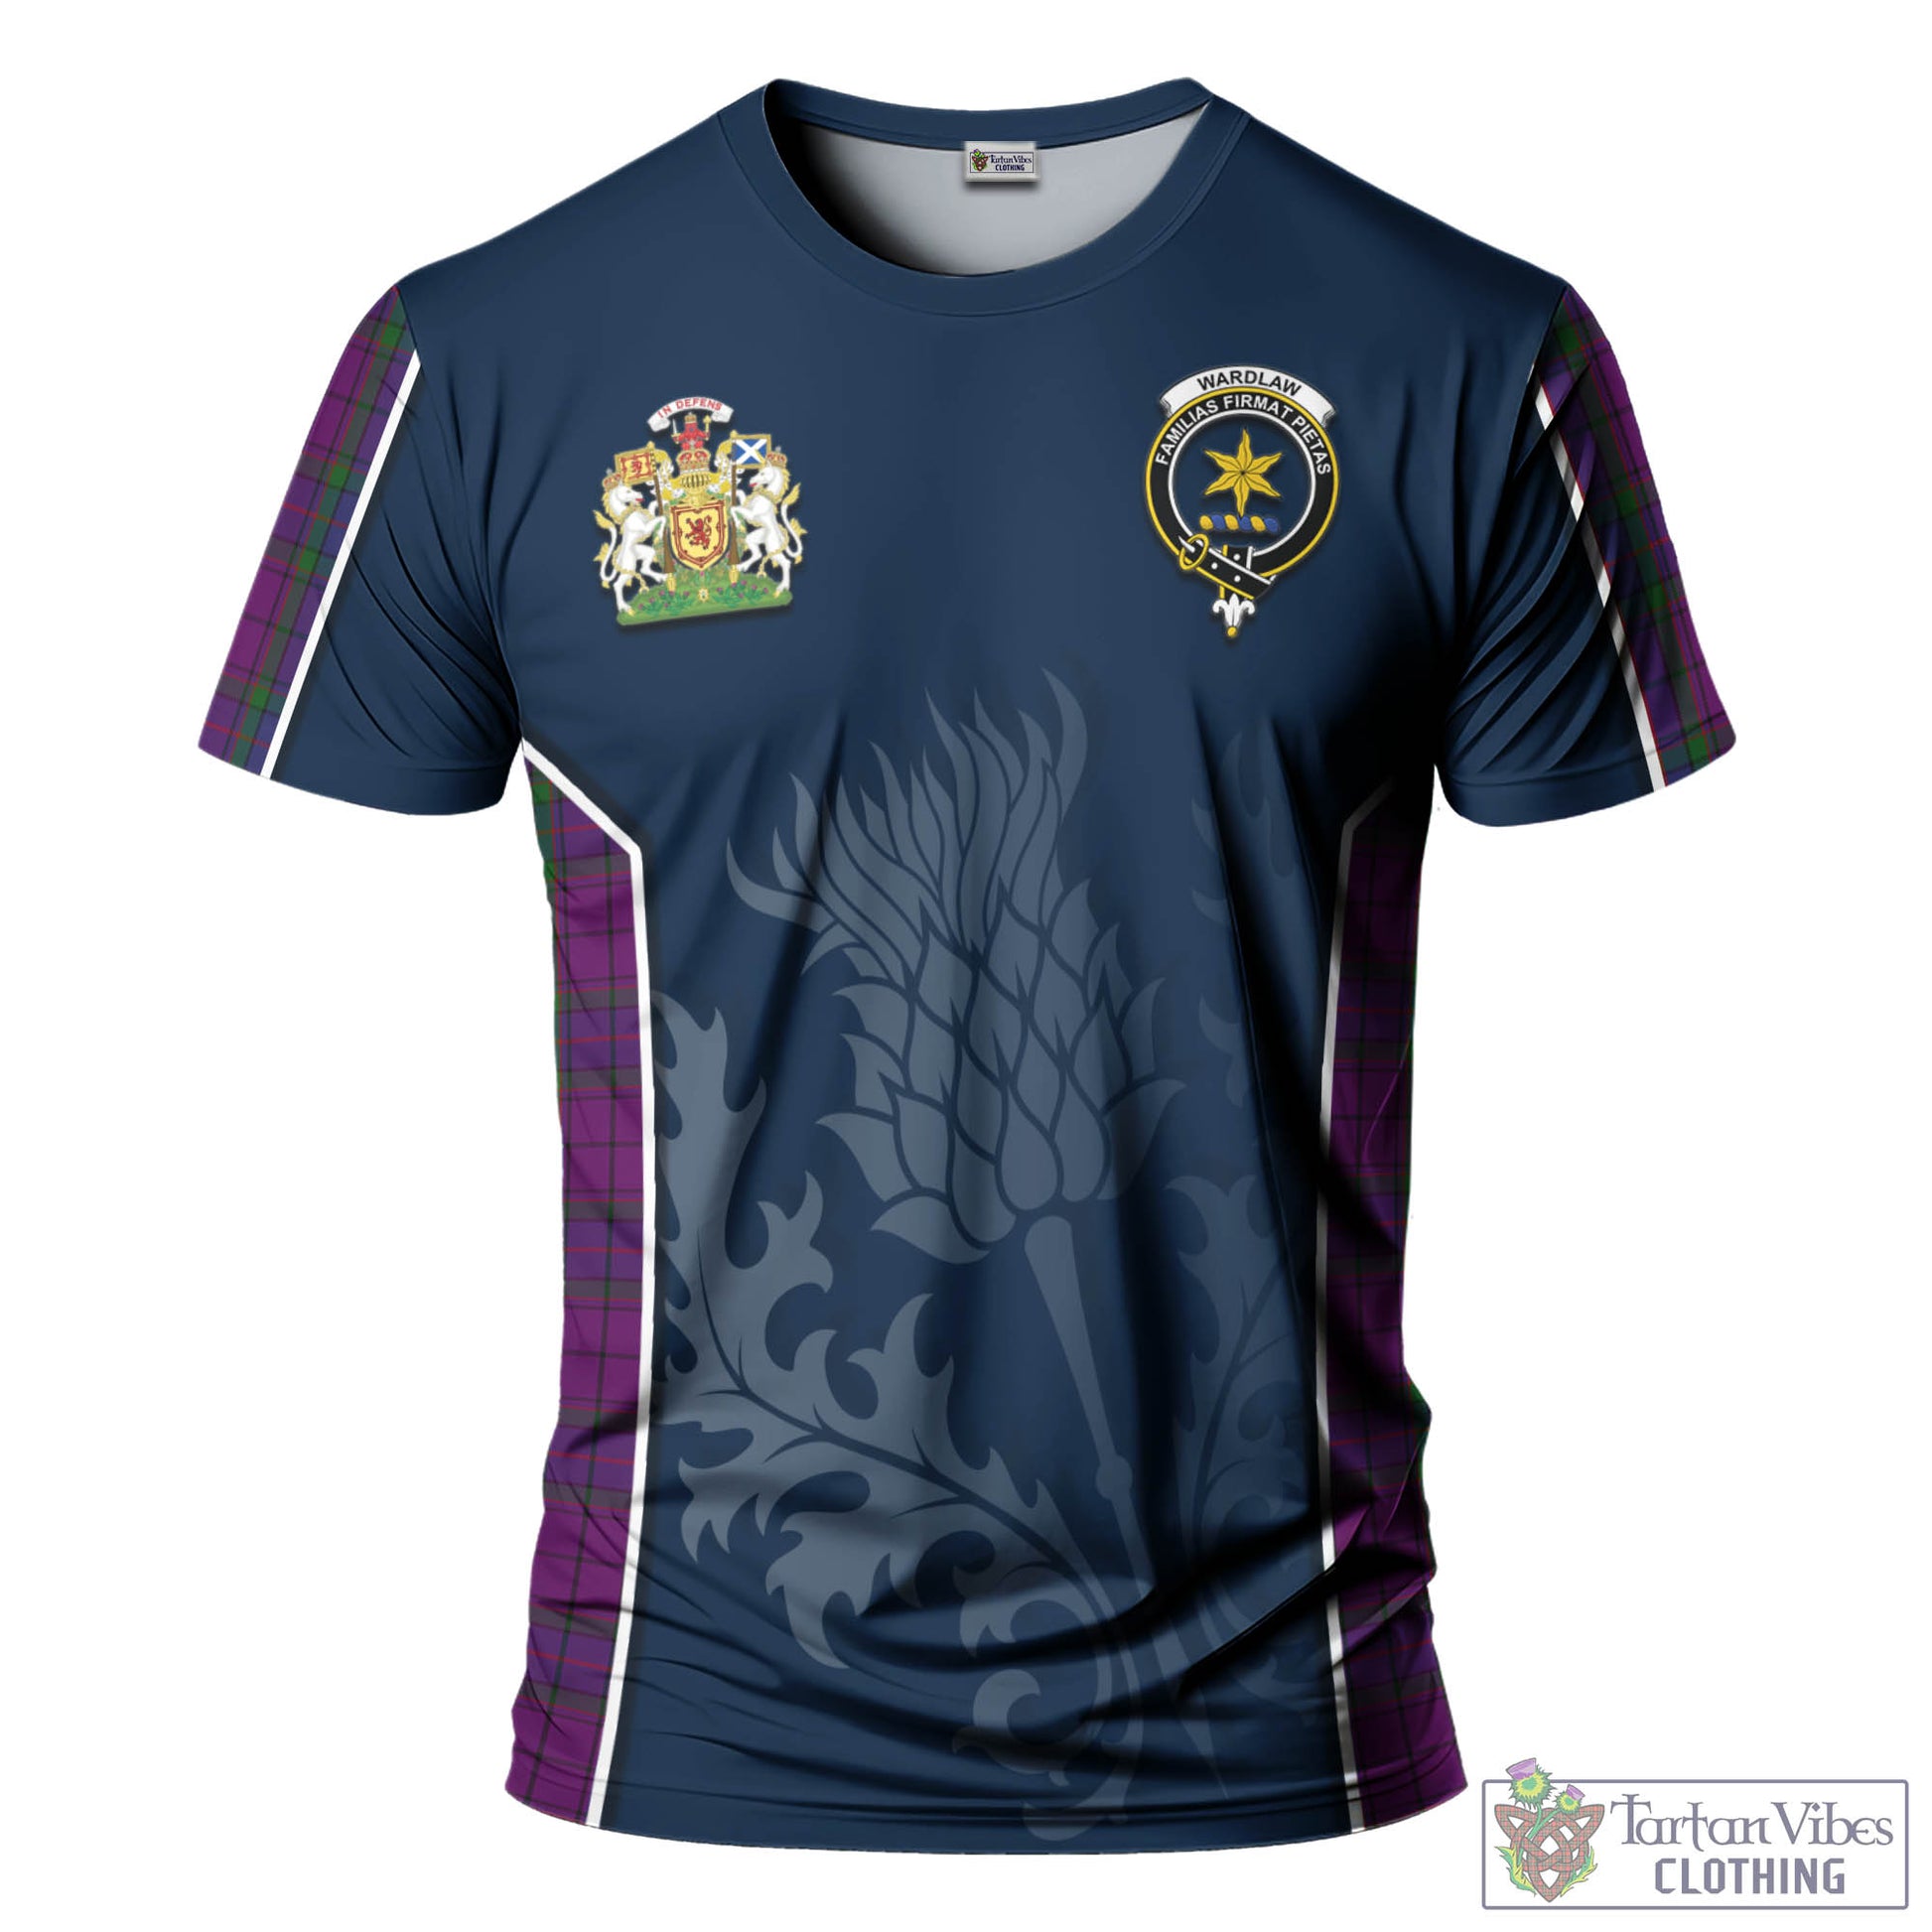 Tartan Vibes Clothing Wardlaw Tartan T-Shirt with Family Crest and Scottish Thistle Vibes Sport Style